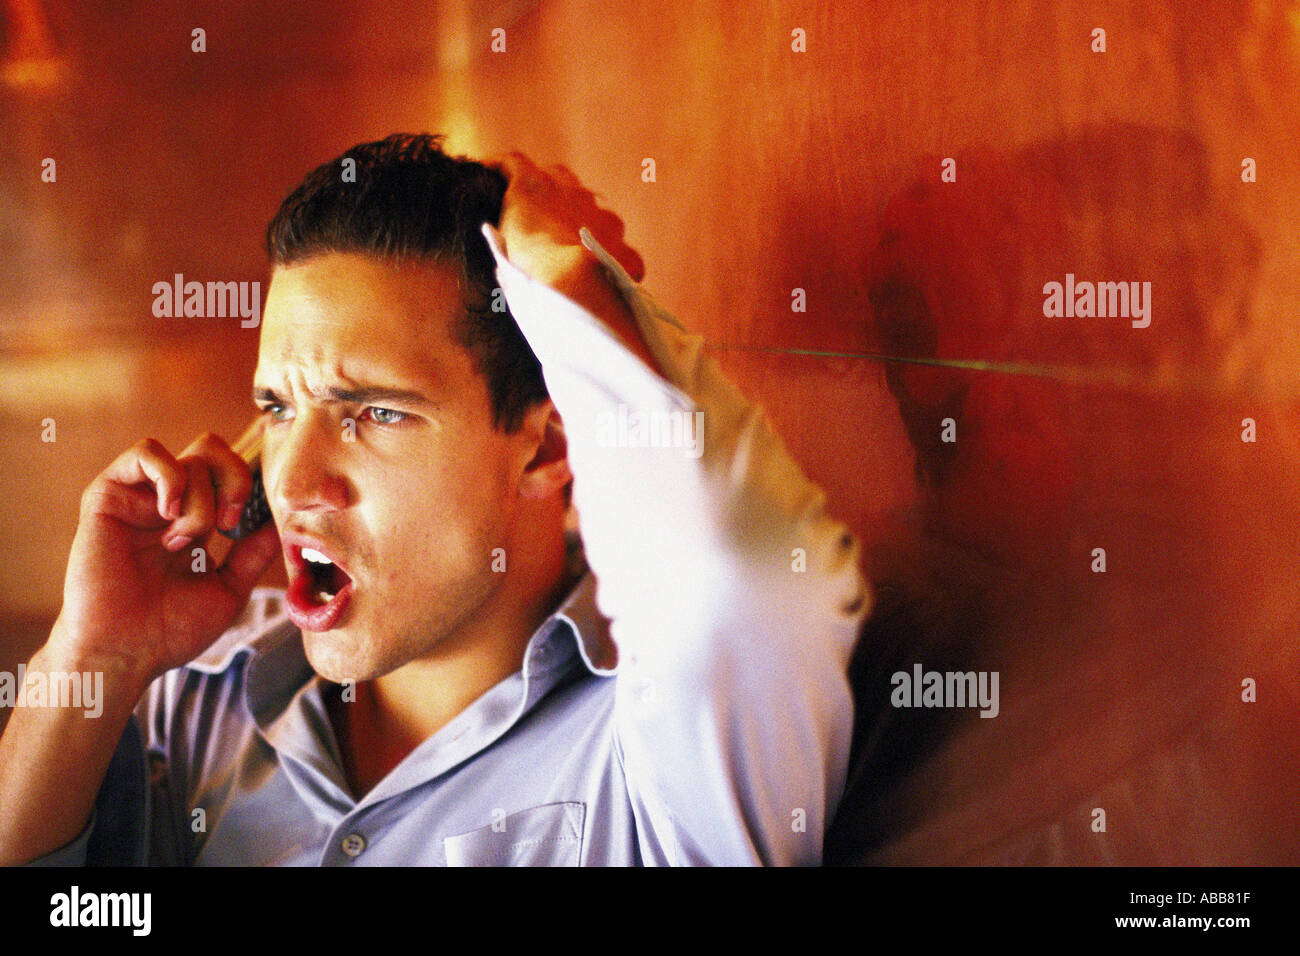 Man talking angrily on cellphone Stock Photo